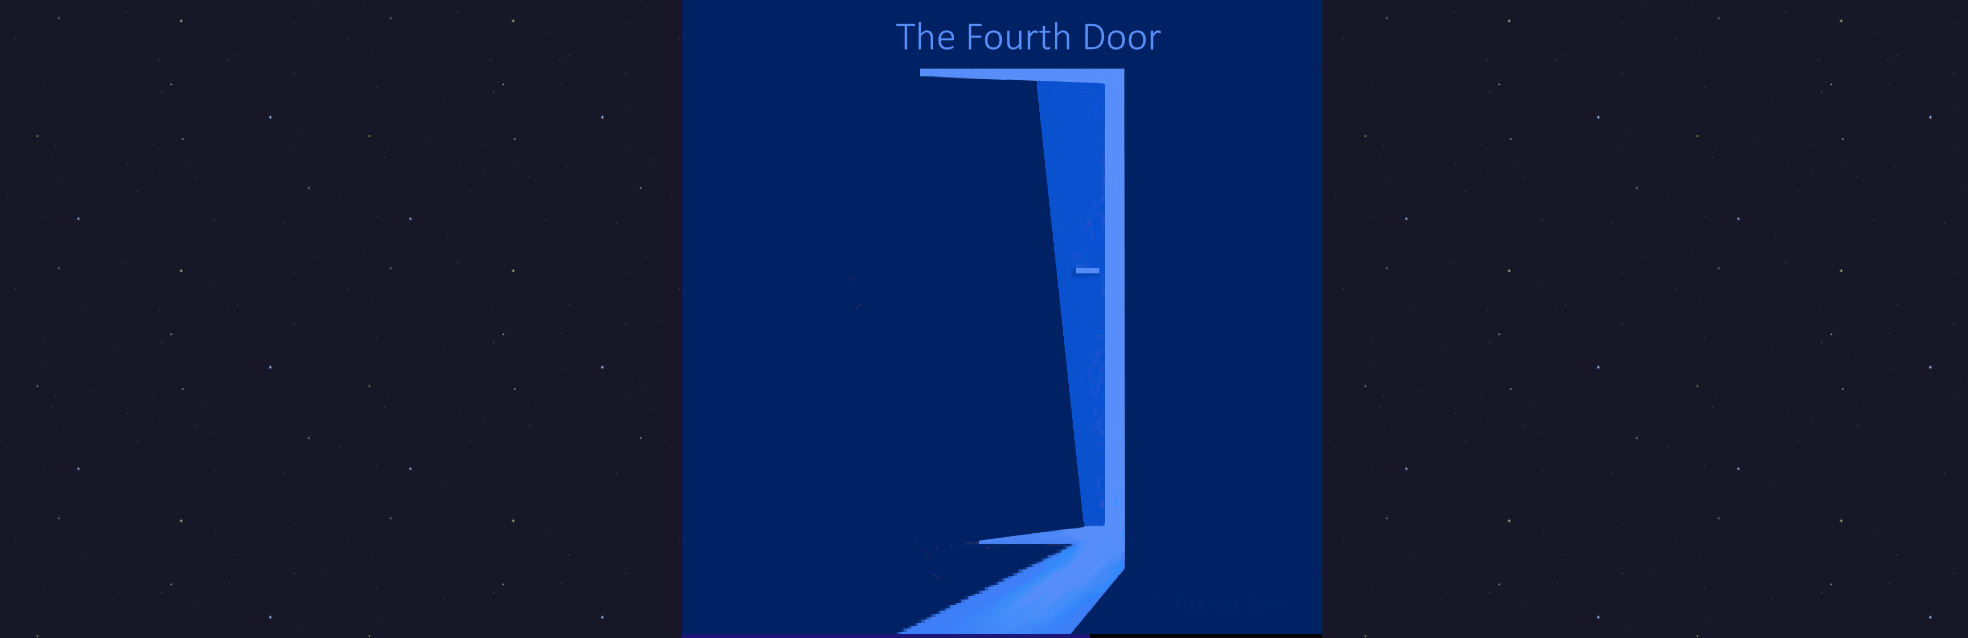 The Fourth Door